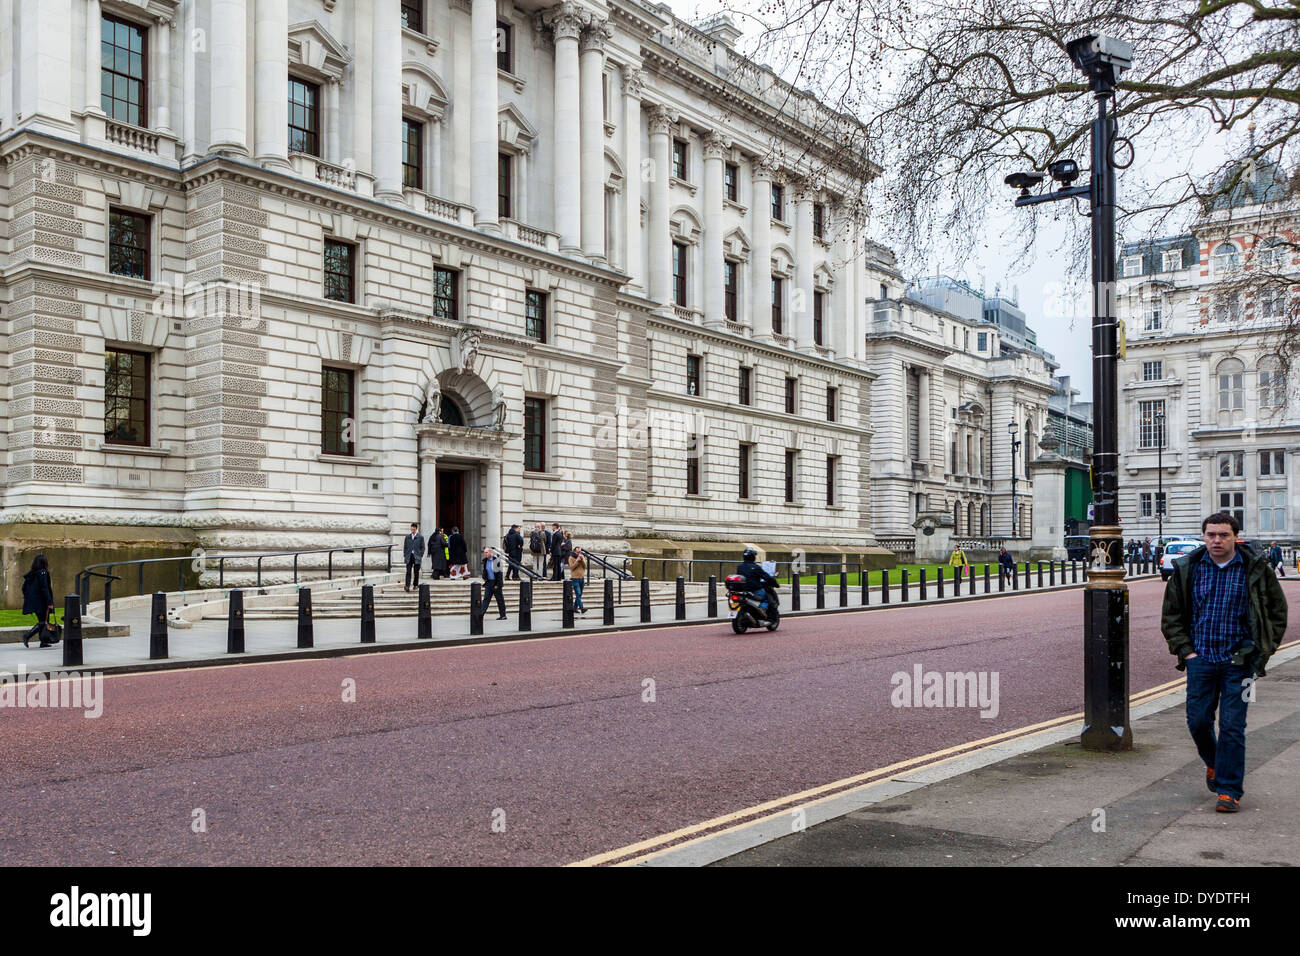 HM Treasury, Her Majesty's Treasury - economic and finance ministry of the British Government in Horse Guards Road, London, UK Stock Photo